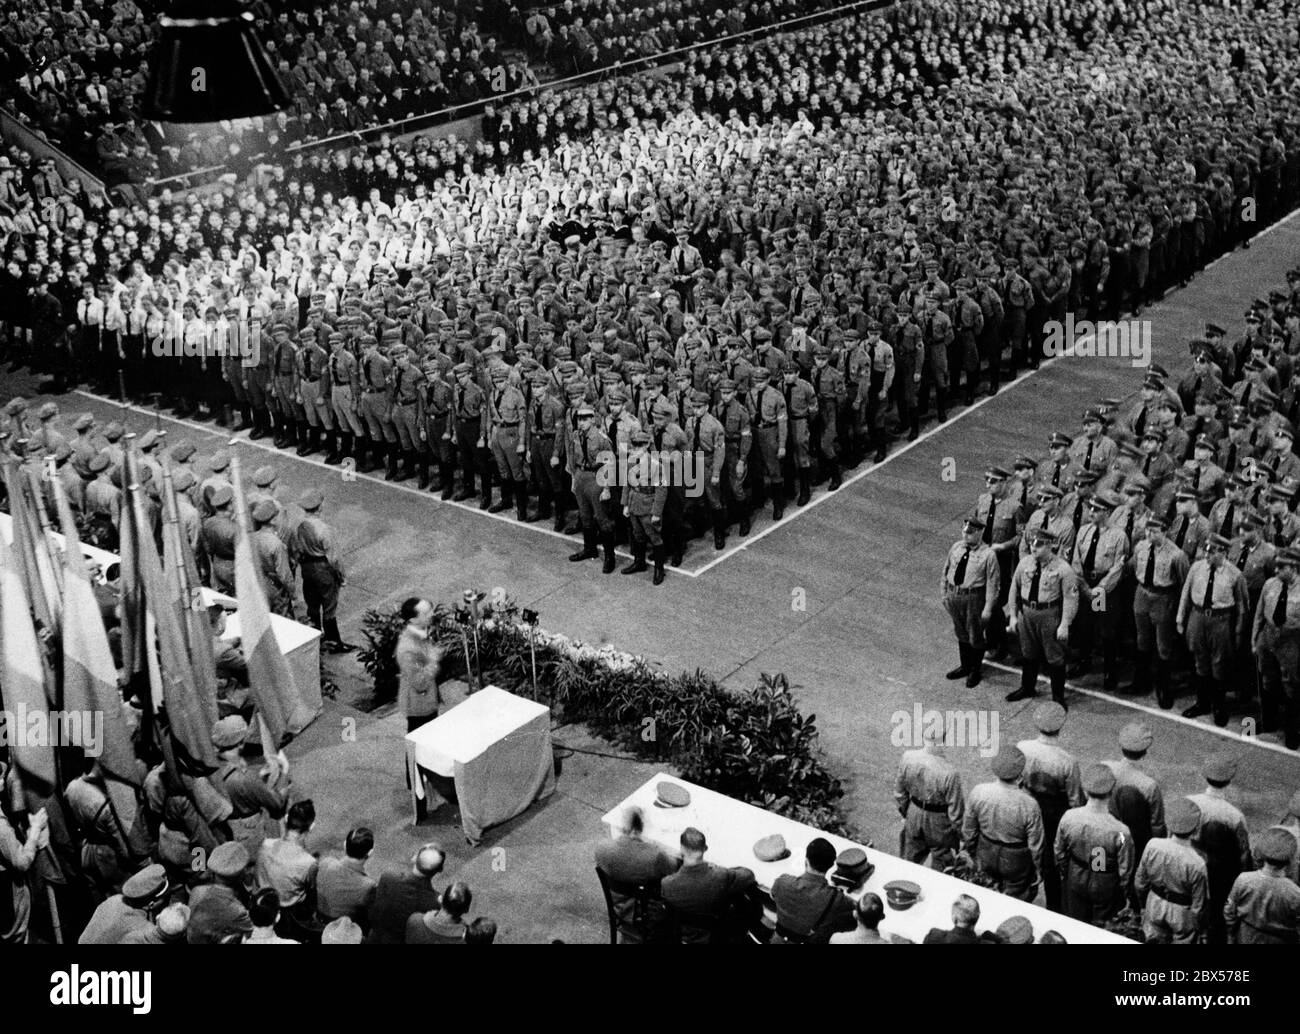 Overview of the Sportpalast during Joseph Goebbels' speech on the swearing in of political leaders on the occasion of Adolf Hitler's birthday. Stock Photo